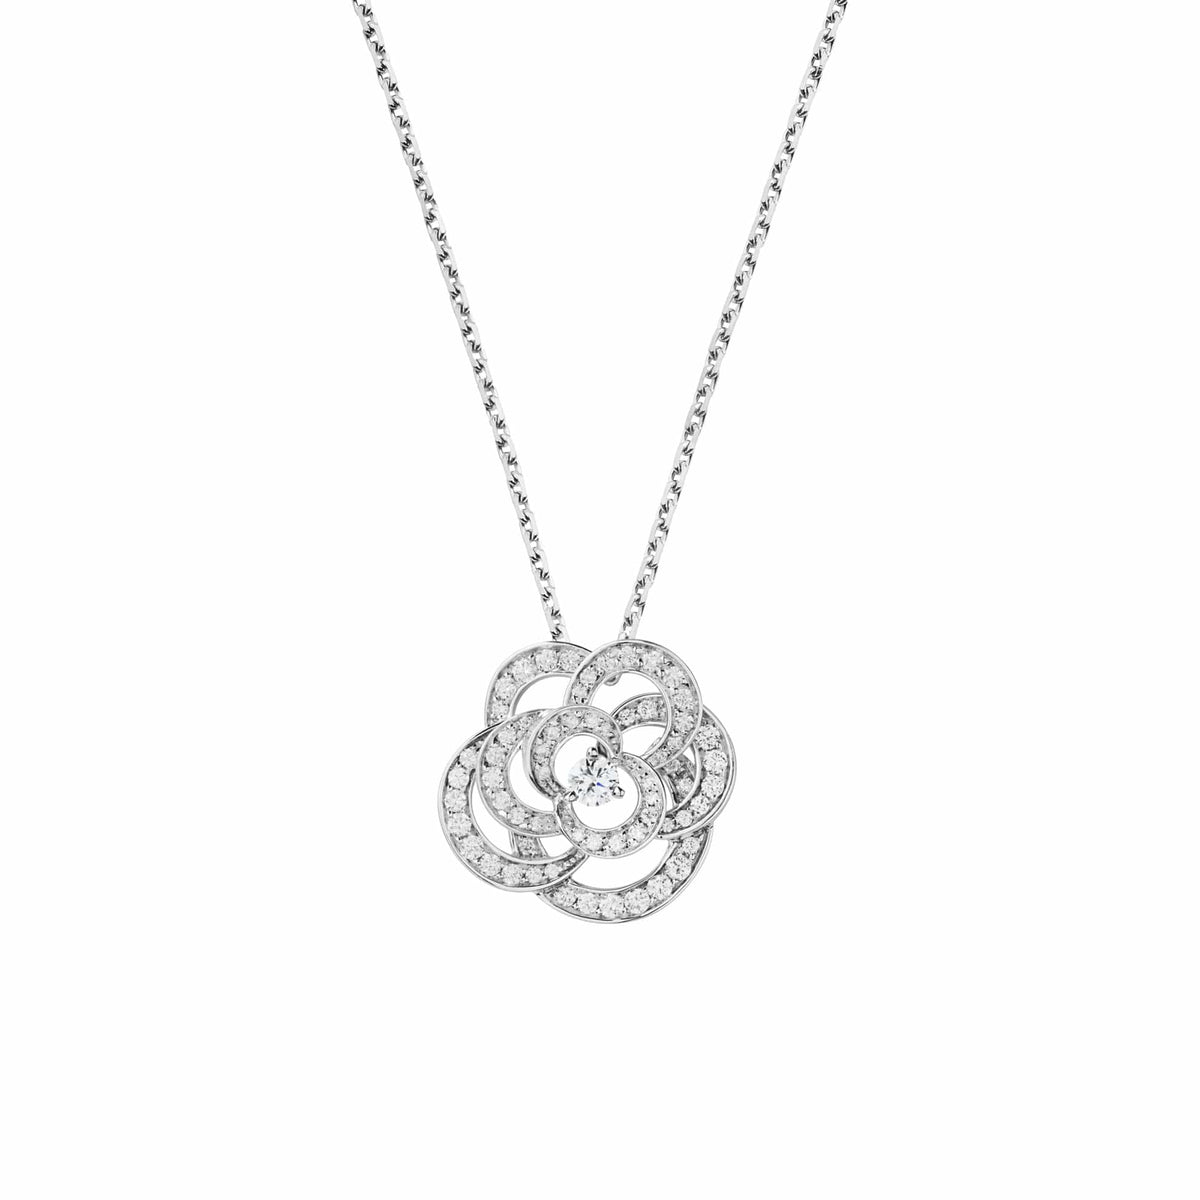 Chanel dedicates a 5555carat diamond necklace to the 100th anniversary of  N5